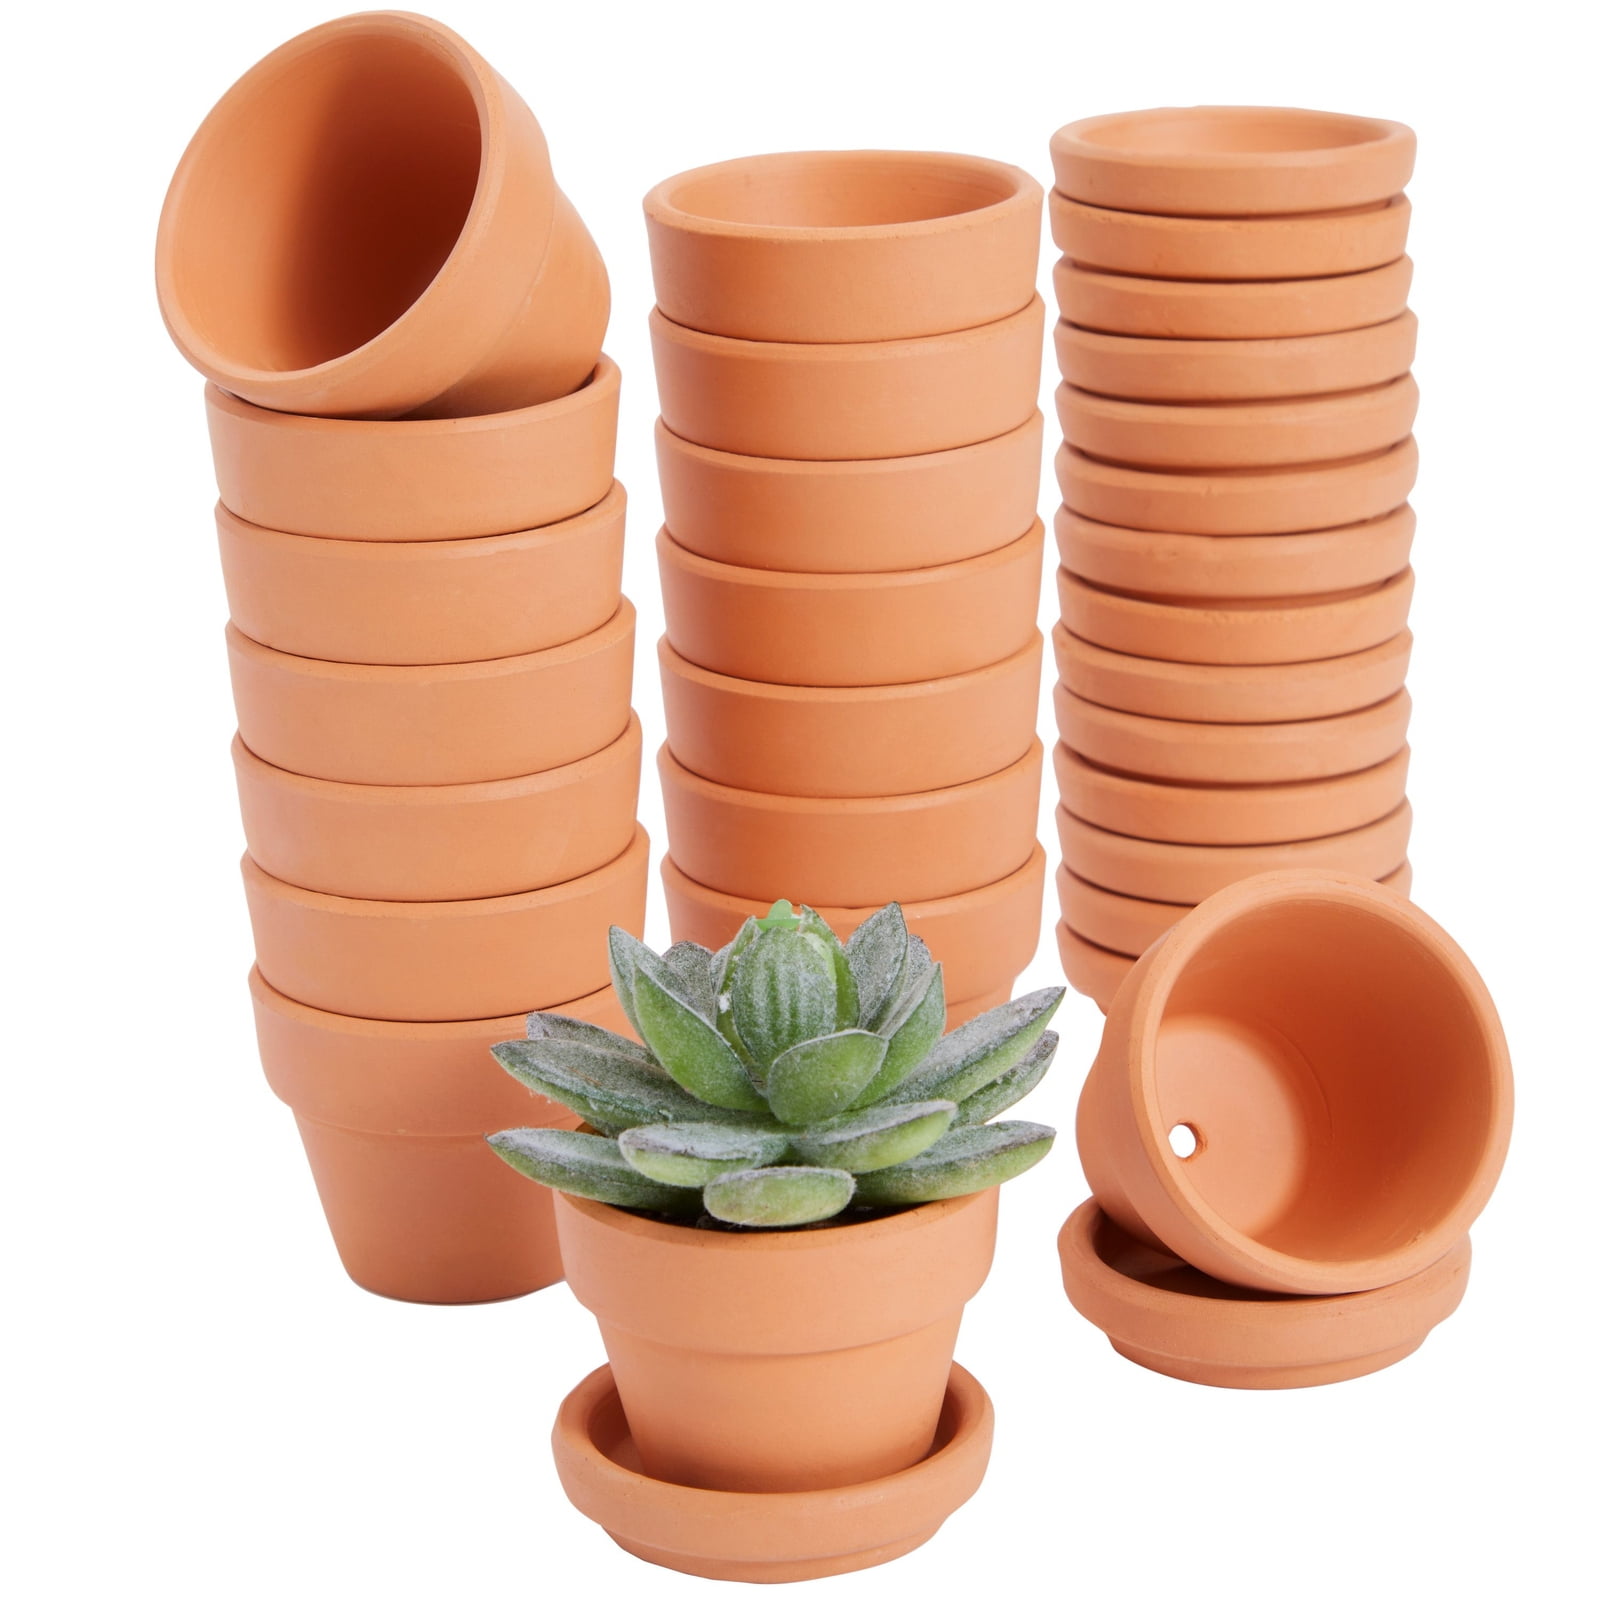 16 Pack 2 Inch Terracotta Pots with Saucer for Drainage, Clay Planters for  Flowers, Indoor Succulents, Crafts, Cactus, 2 x  In 